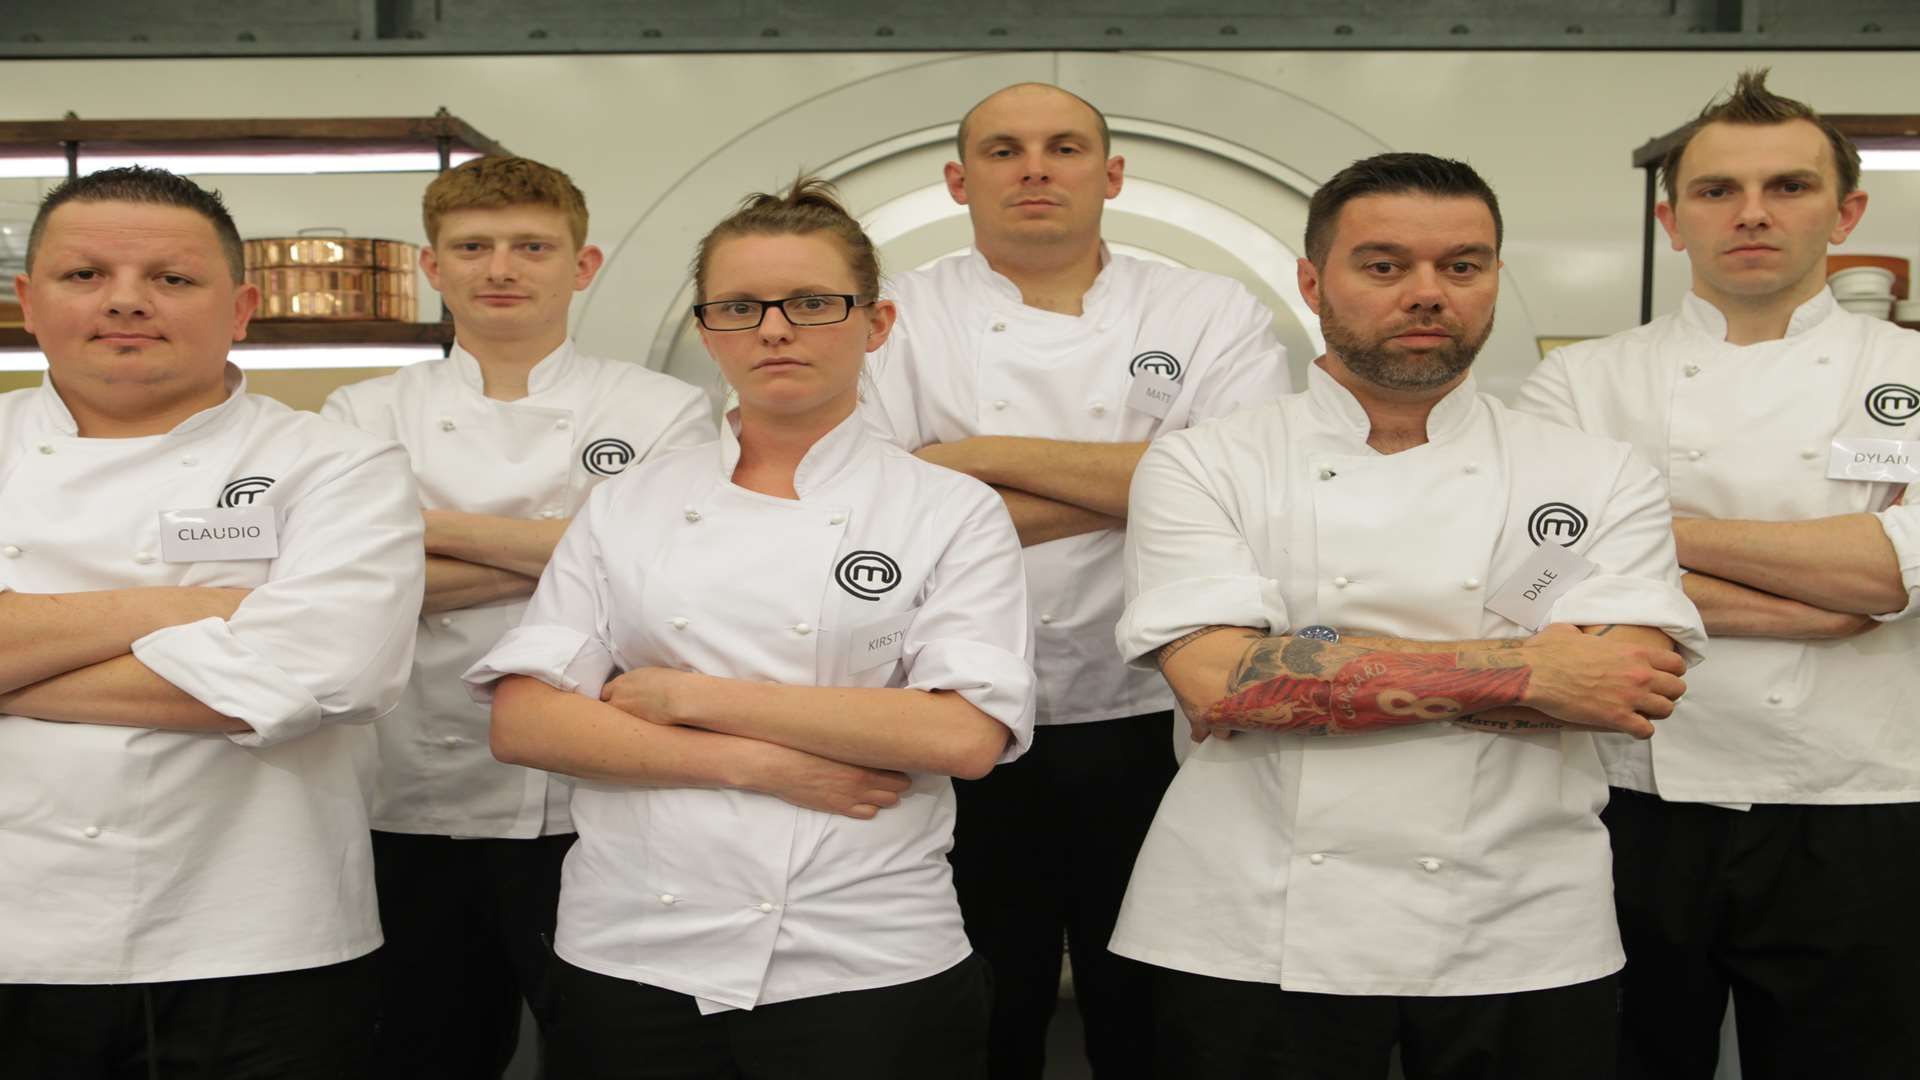 Dale was tasked with cooking against five other chefs in the hope of securing a place in the quarter final. Picture: BBC Original